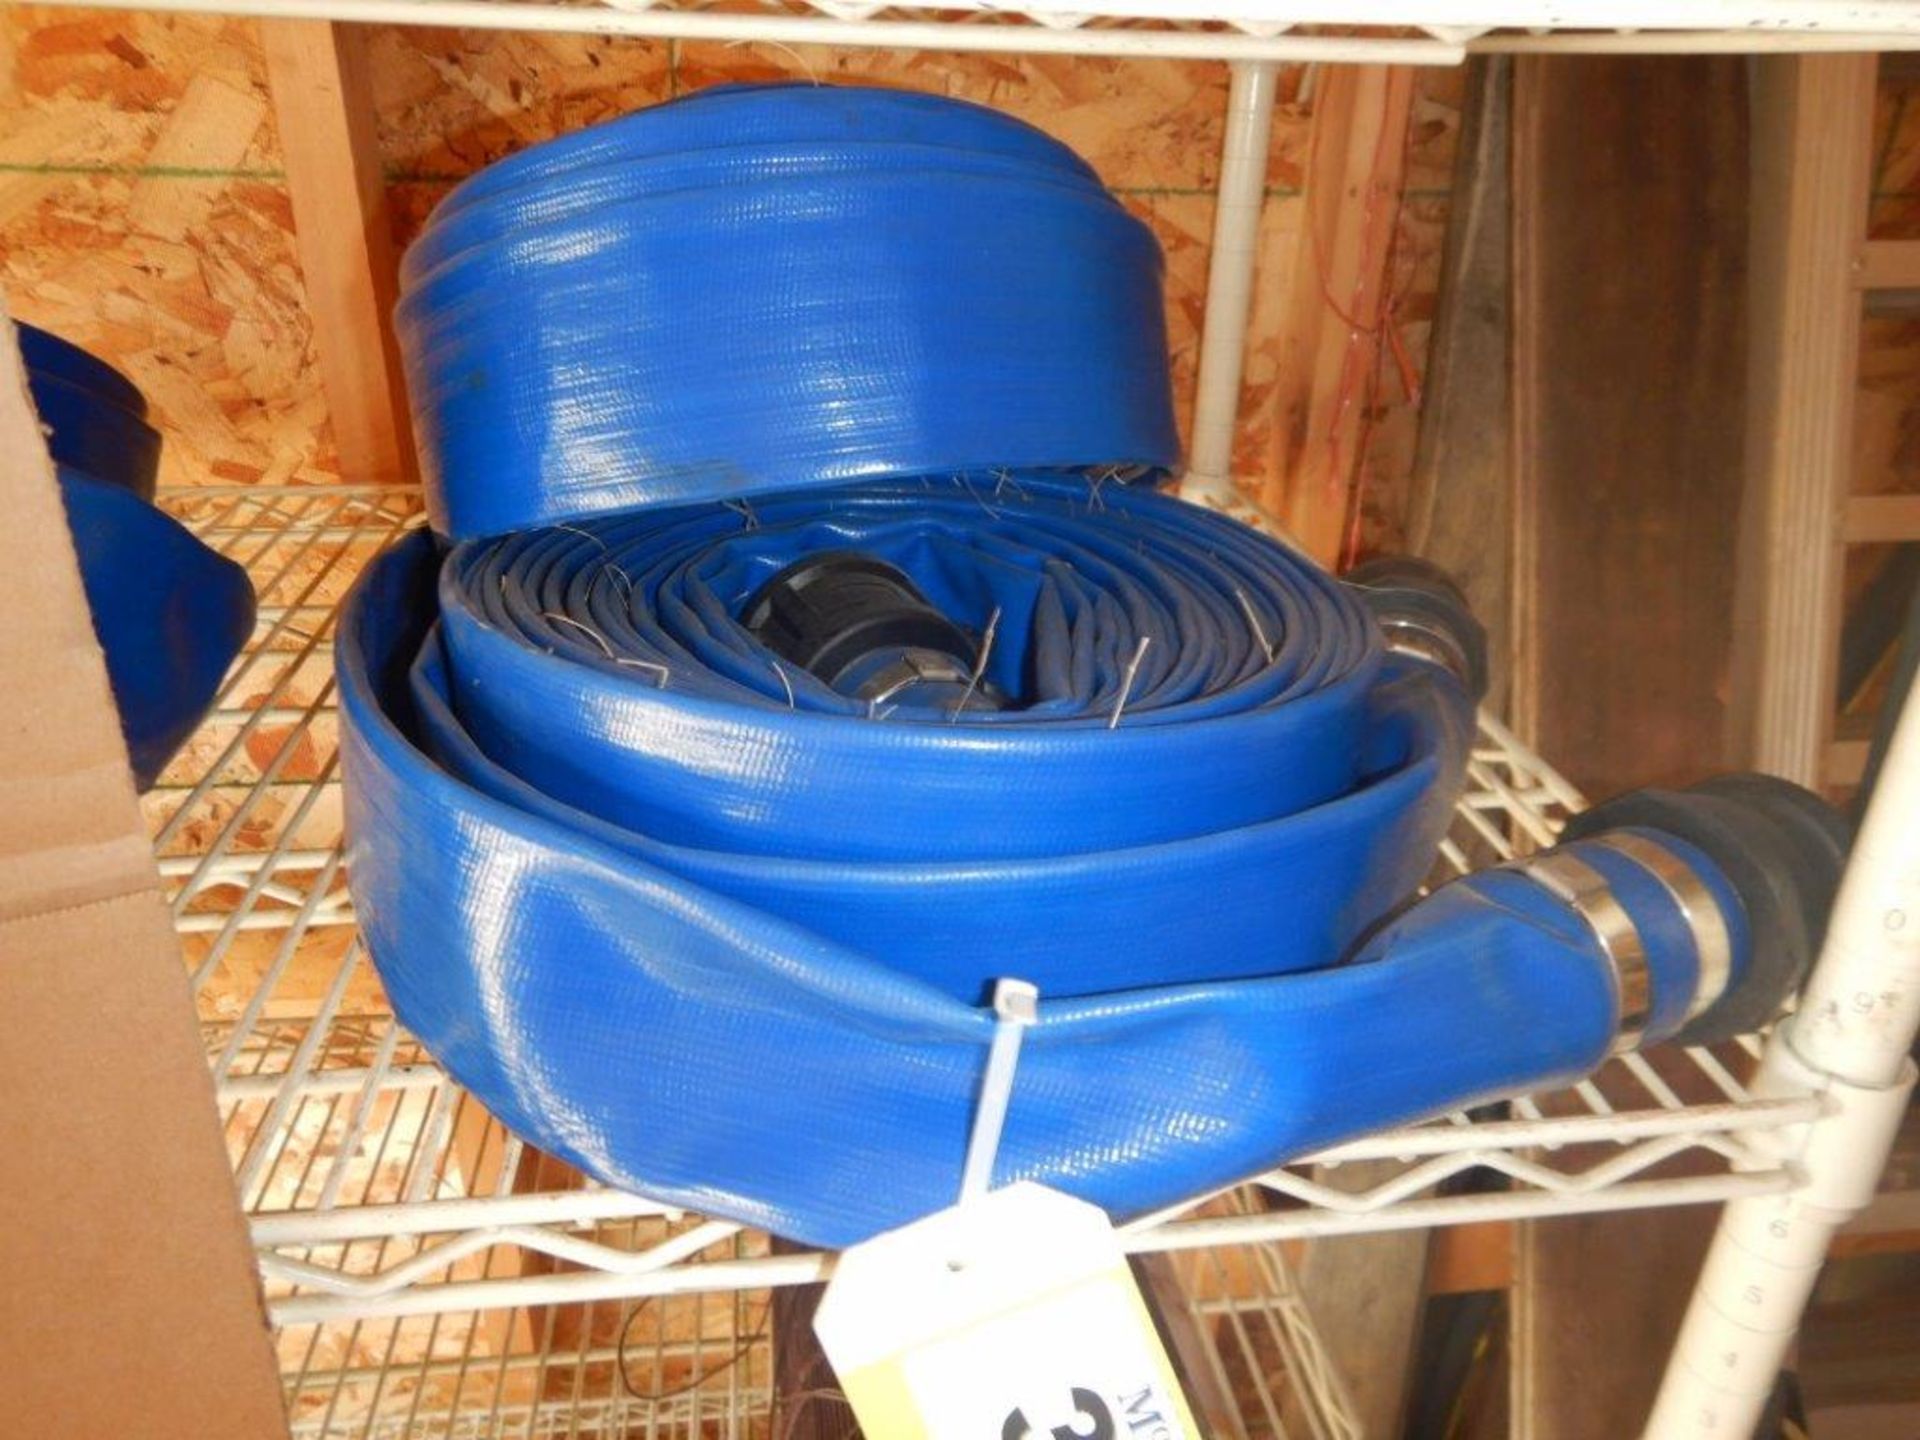 L/O 2 INCH WATER PUMP DISCHARGE HOSE - Image 3 of 3